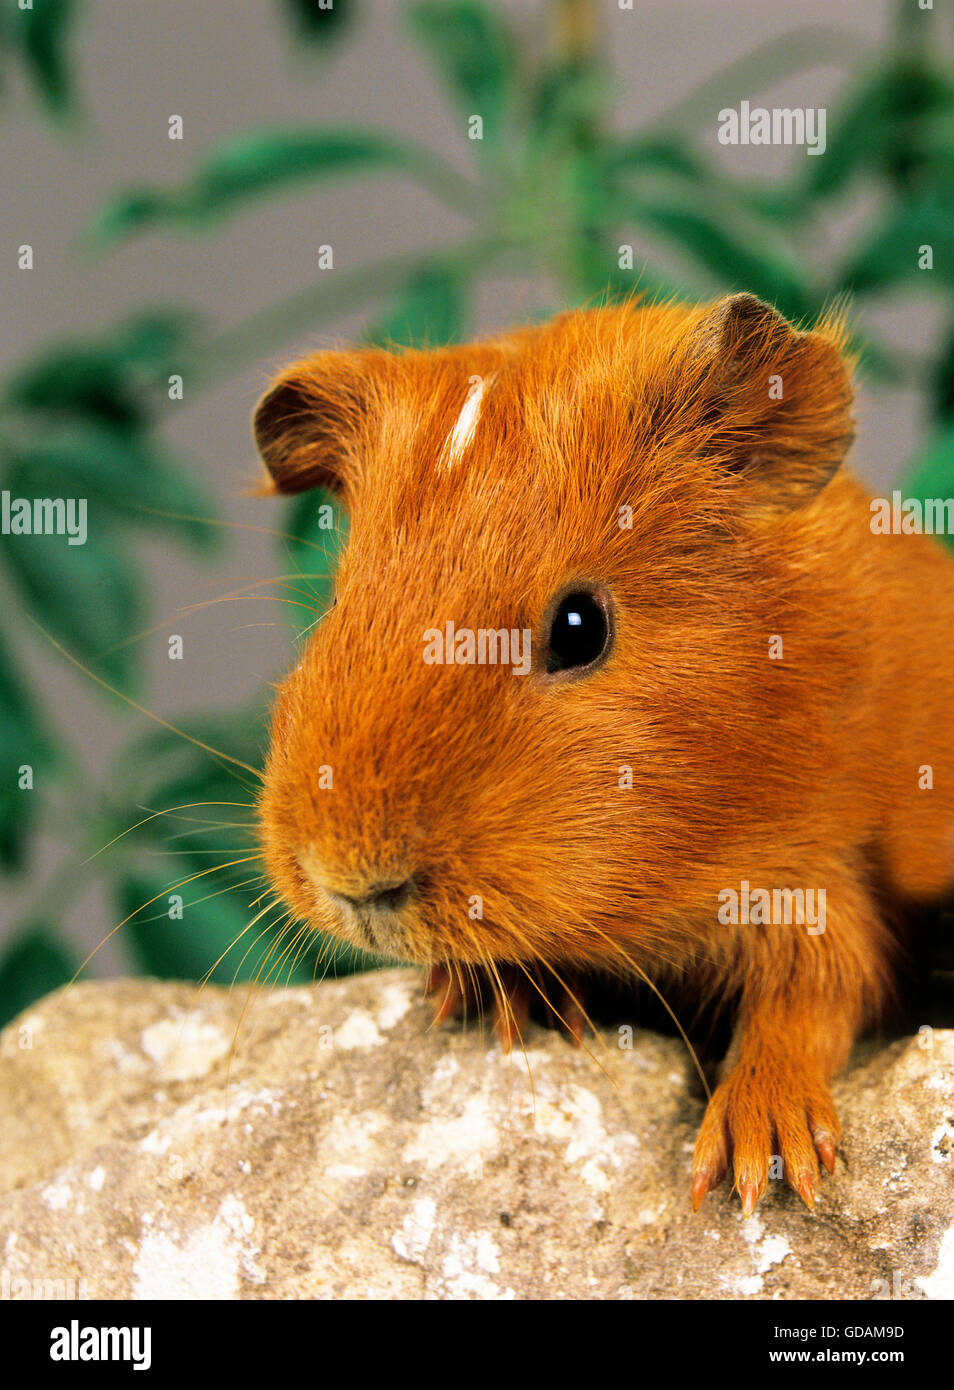 Guinea Pig, cavia porcellus, Adult on Stone Stock Photo